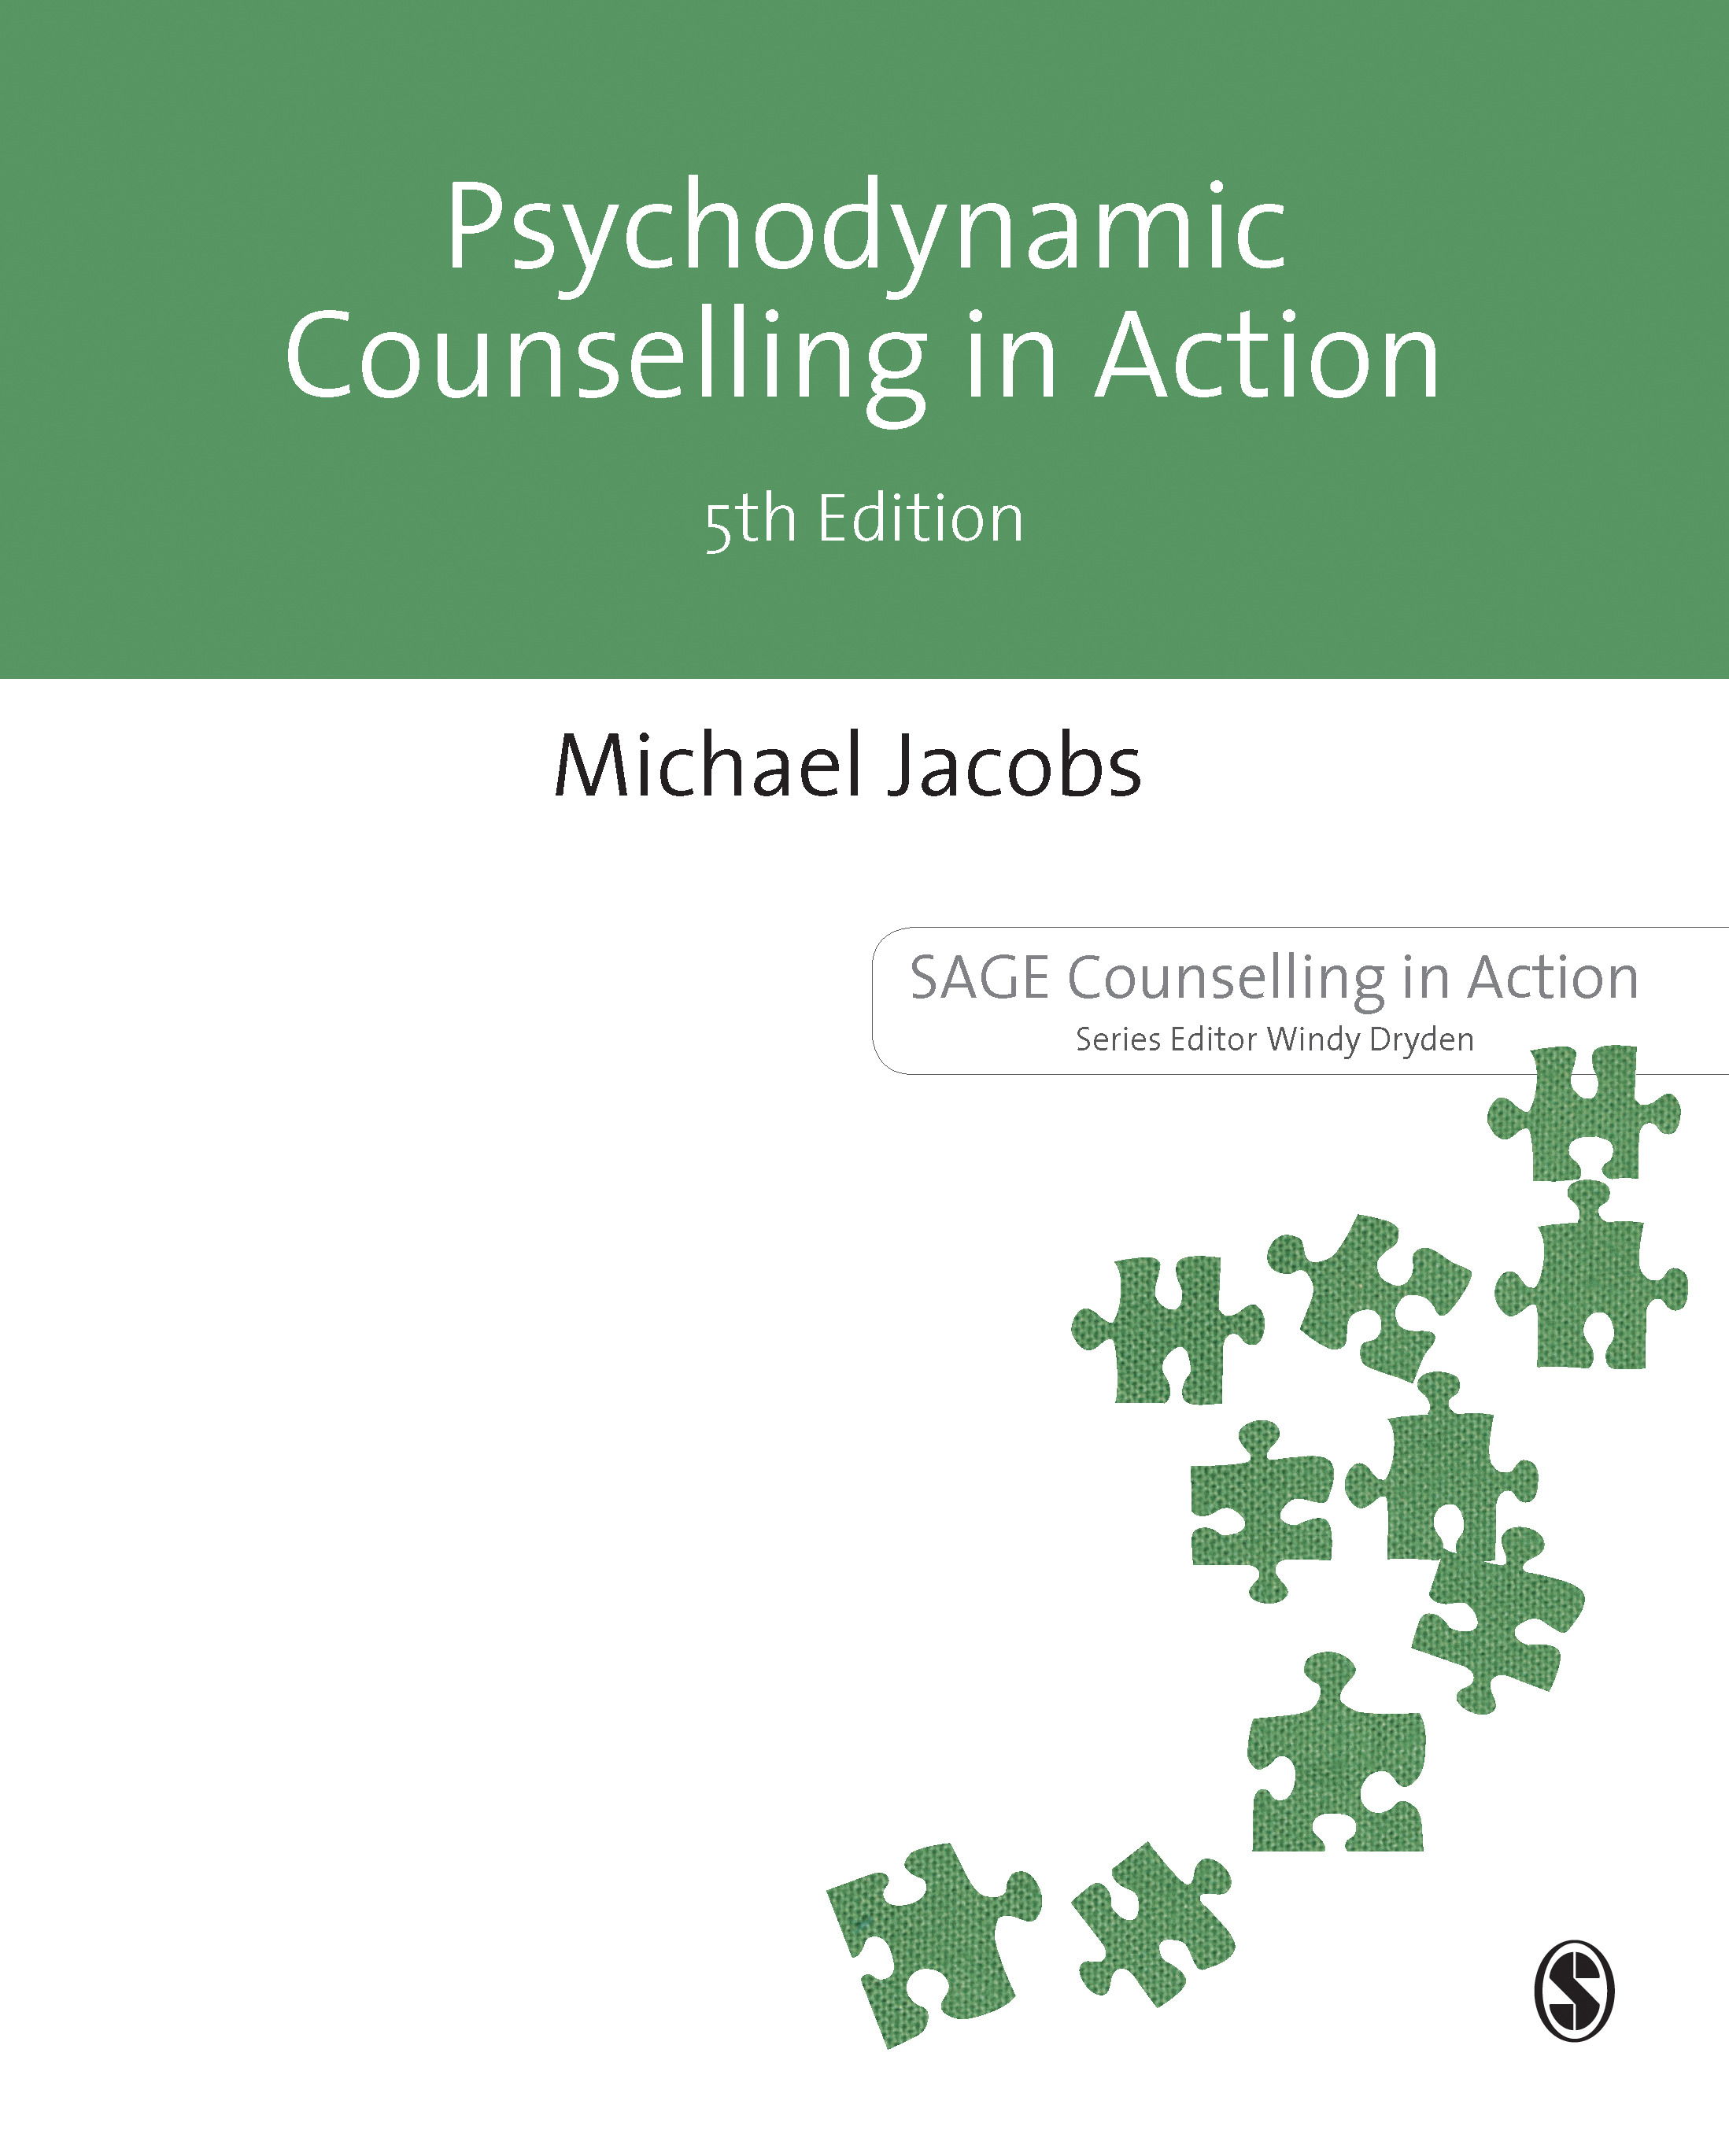 Psychodynamic Counselling in Action book cover 